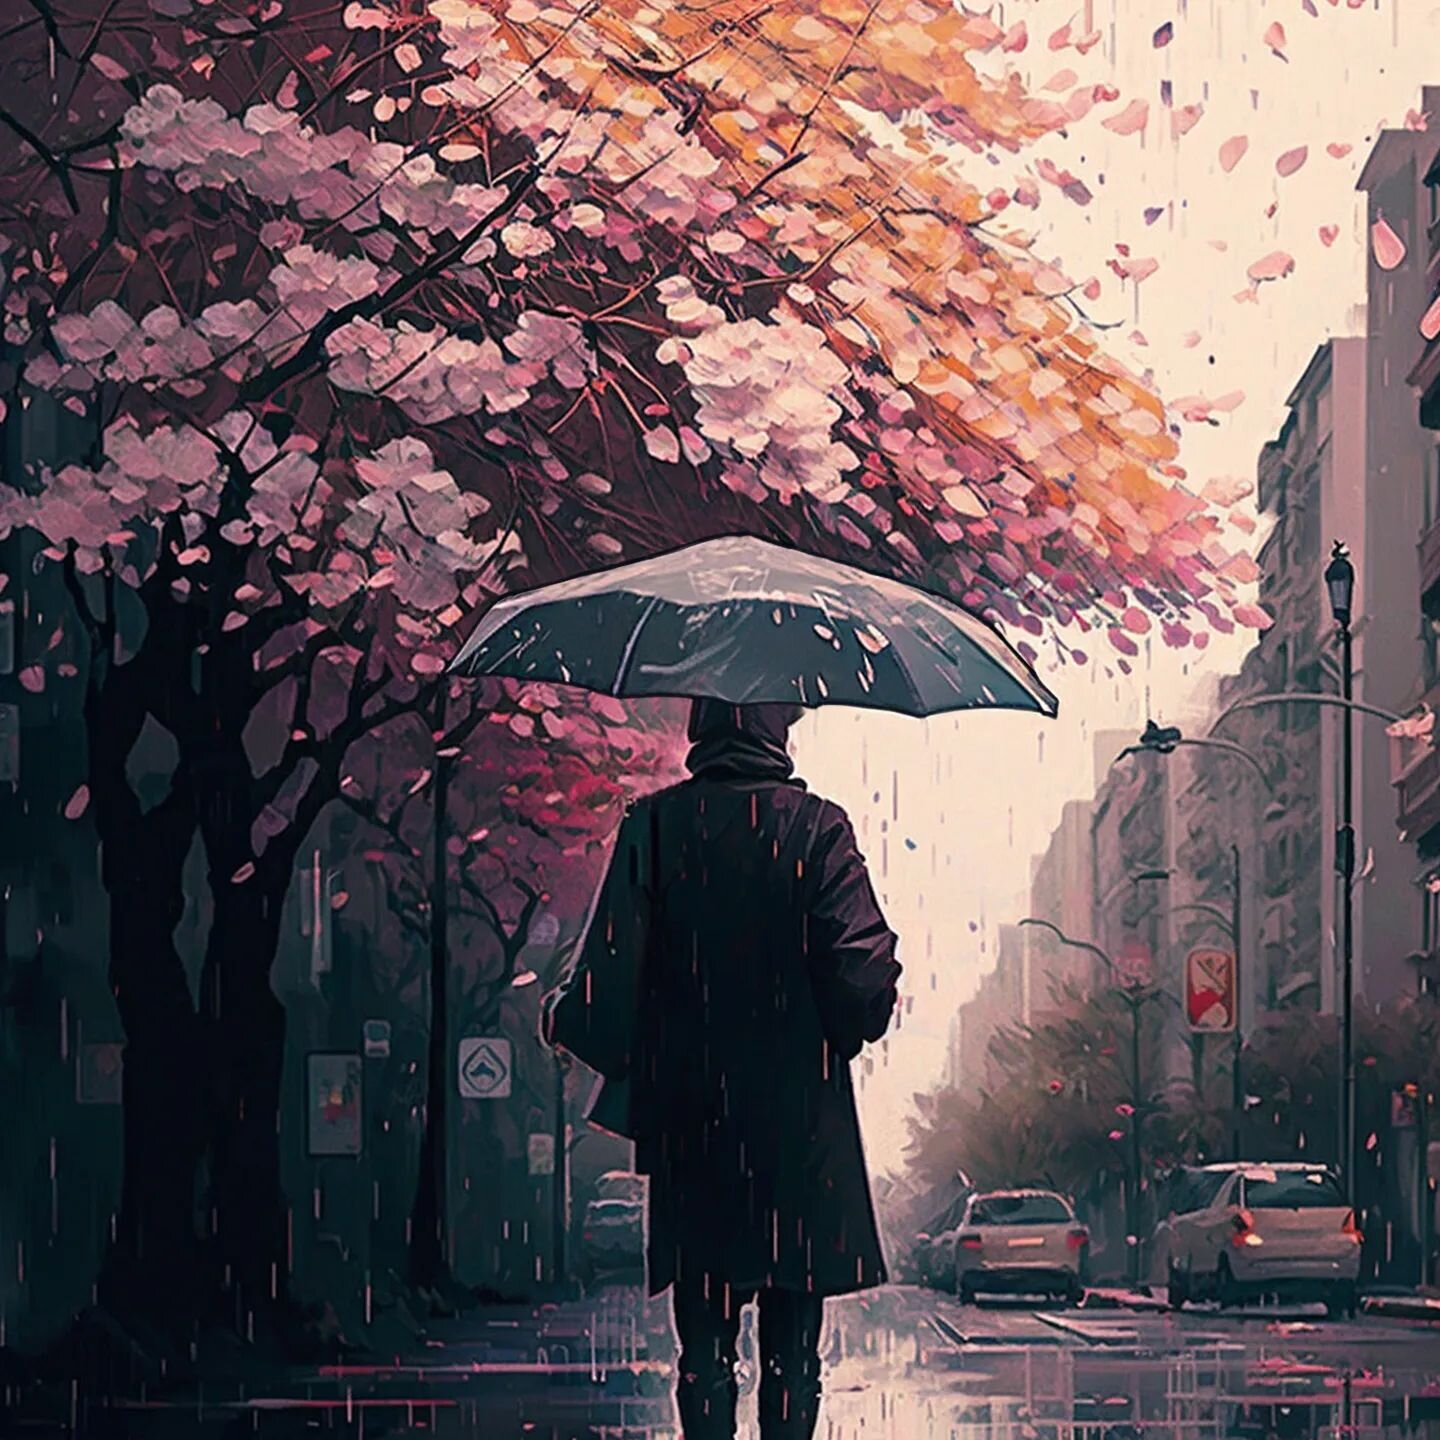 Hey friends! This one is called &quot;May Showers&quot;, inspired by a springtime stroll through the town as rain sprinkles lazily to the mirrored ground, and aromas of flowers drift by. Relax, unwind, and put on some lo-fi by my project @circa83musi